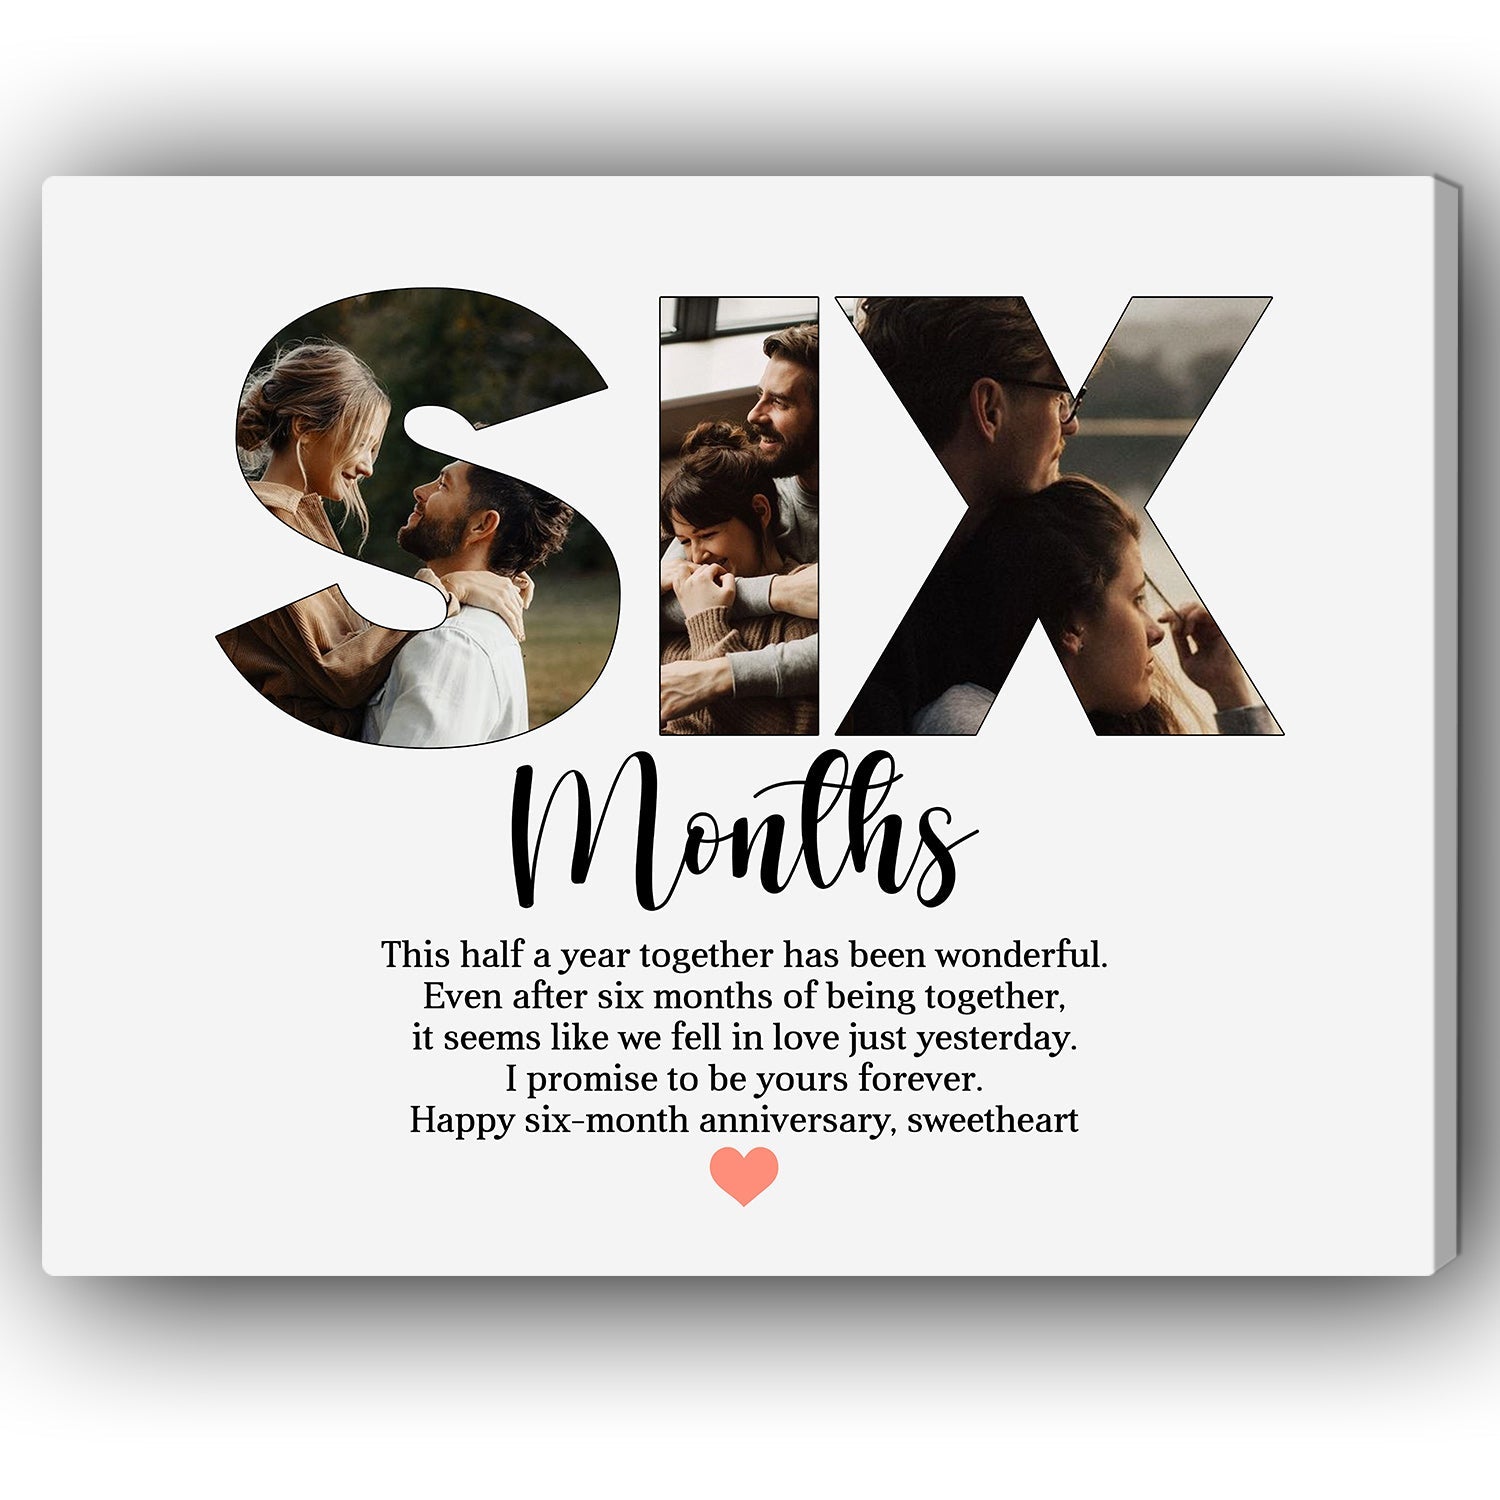 Six Months - Personalized 6 Month Anniversary gift for Boyfriend or Girlfriend - Custom Canvas Print - MyMindfulGifts